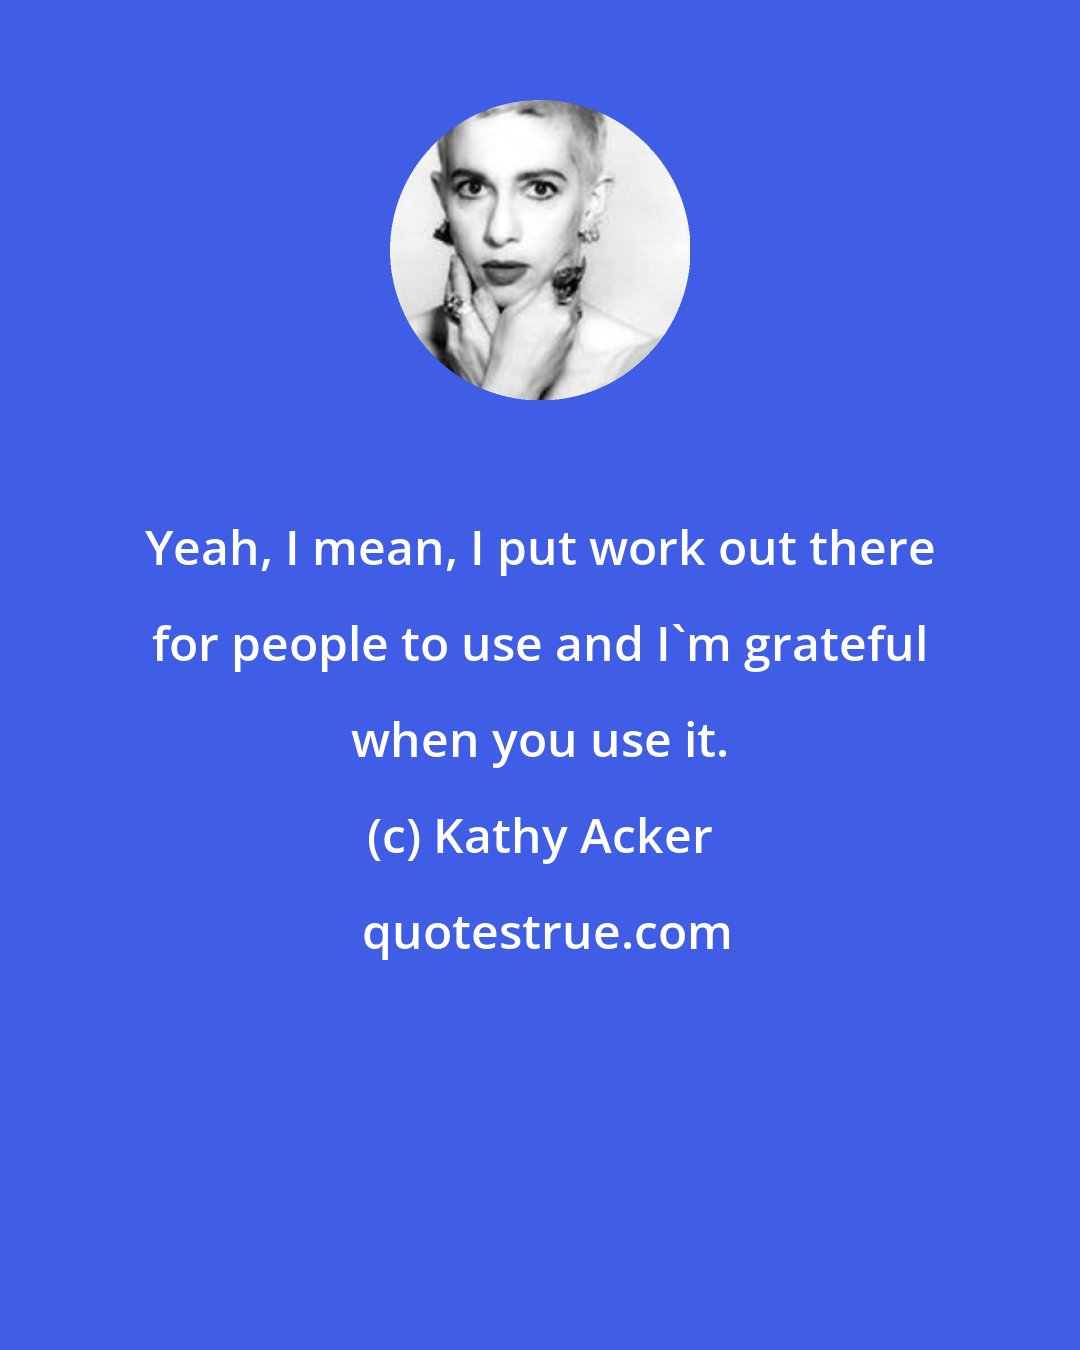 Kathy Acker: Yeah, I mean, I put work out there for people to use and I'm grateful when you use it.